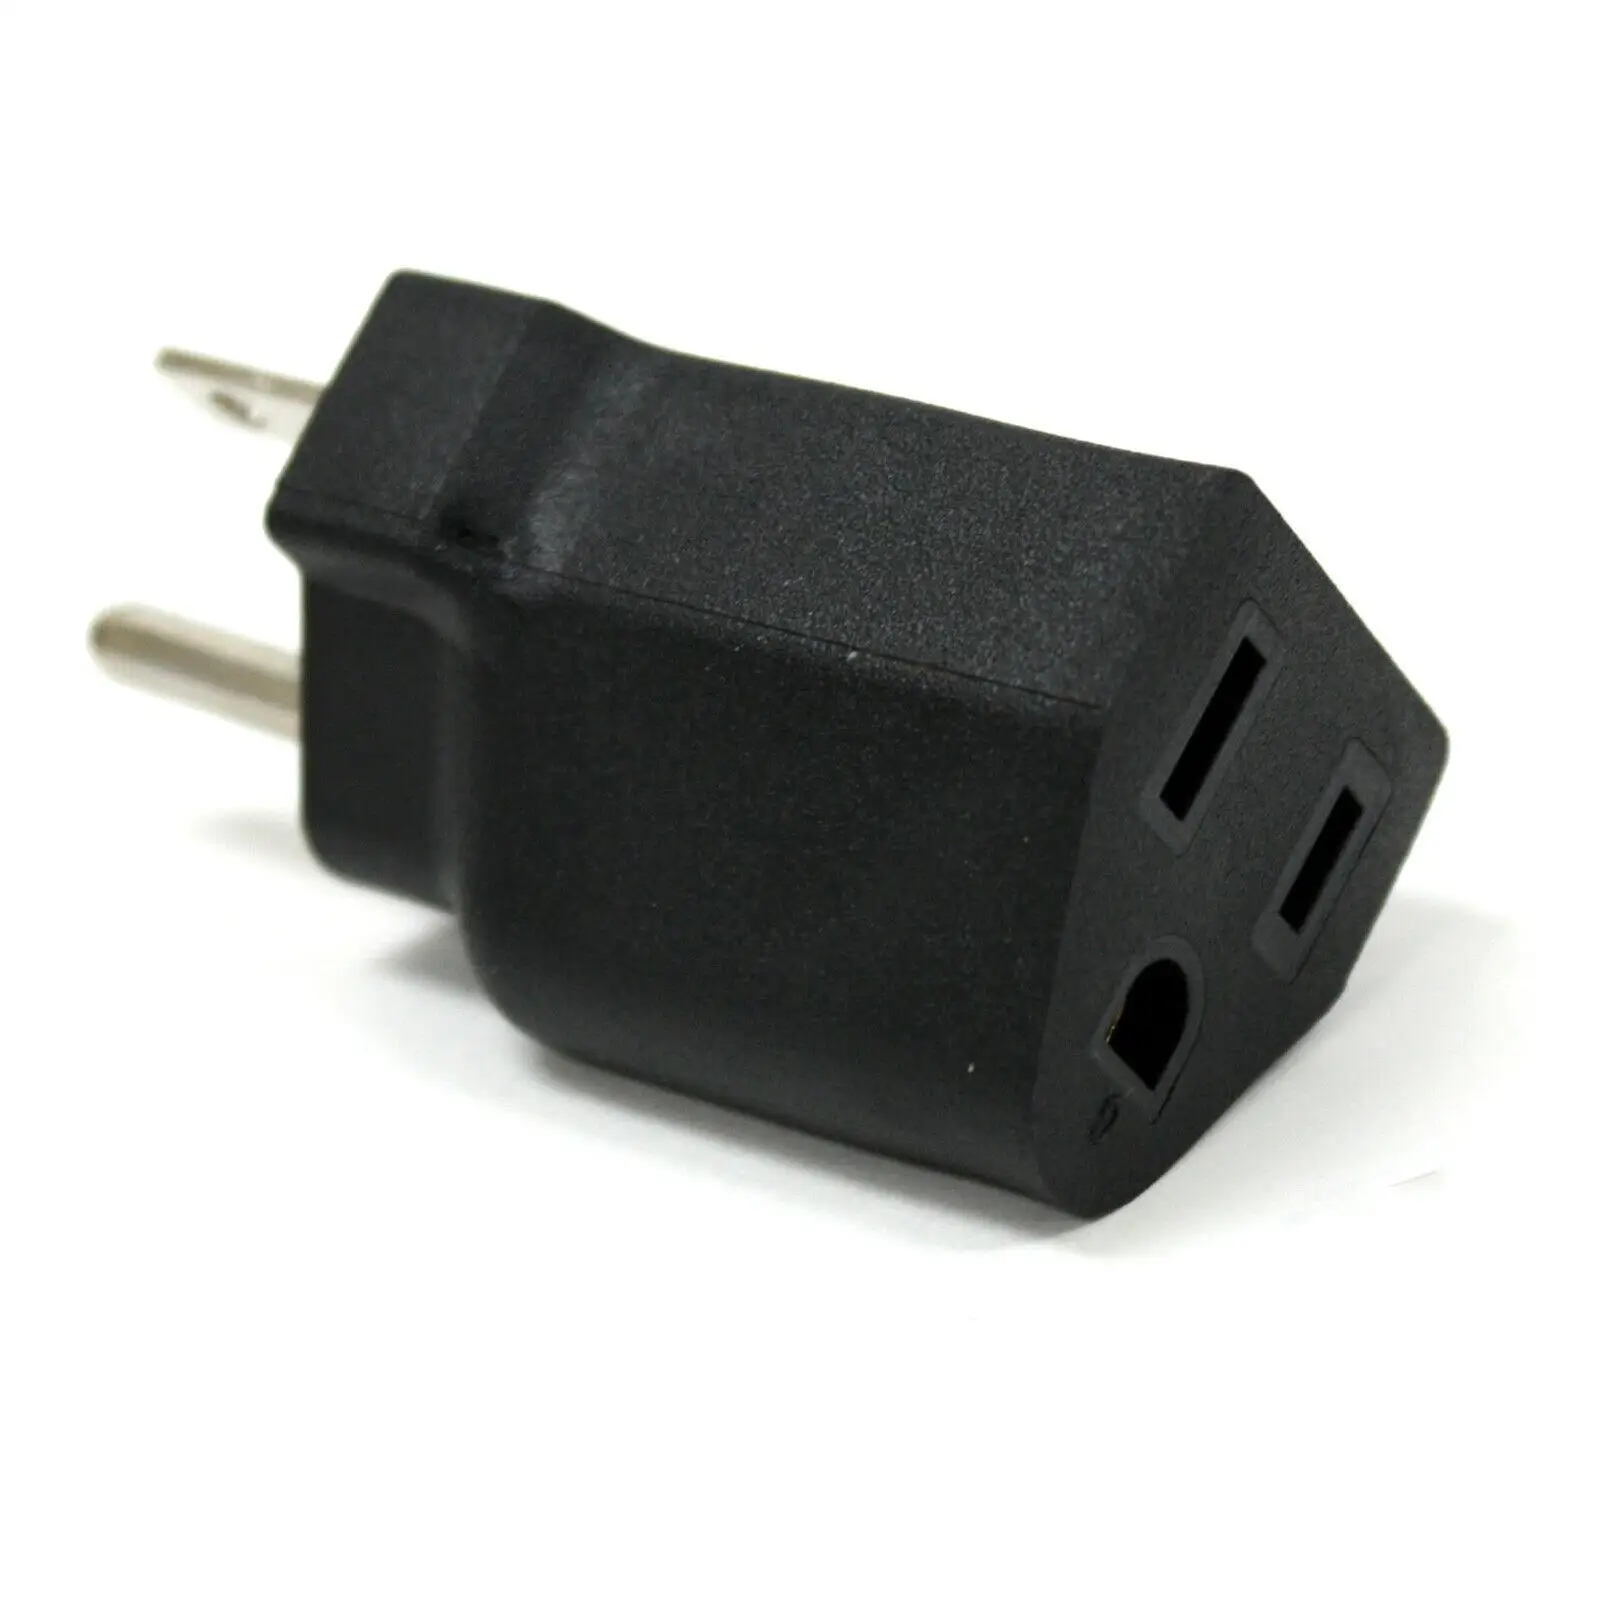 2x 3 Prong to European to Plug Adapter Easy And Convenient to Install And Use